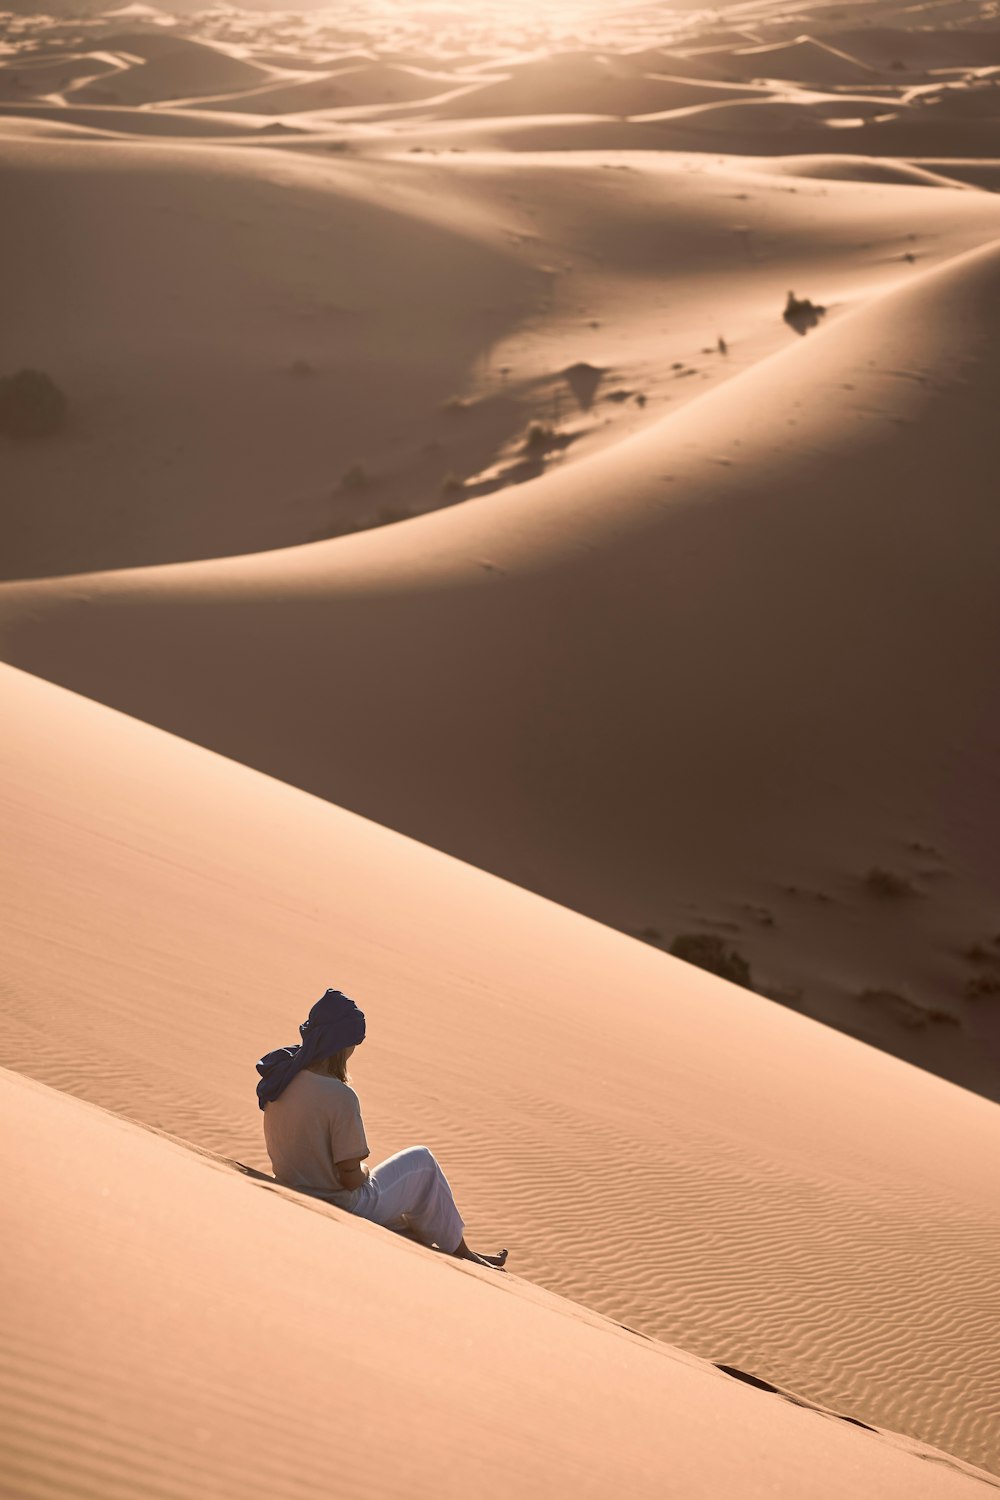 a person sitting in the middle of a desert